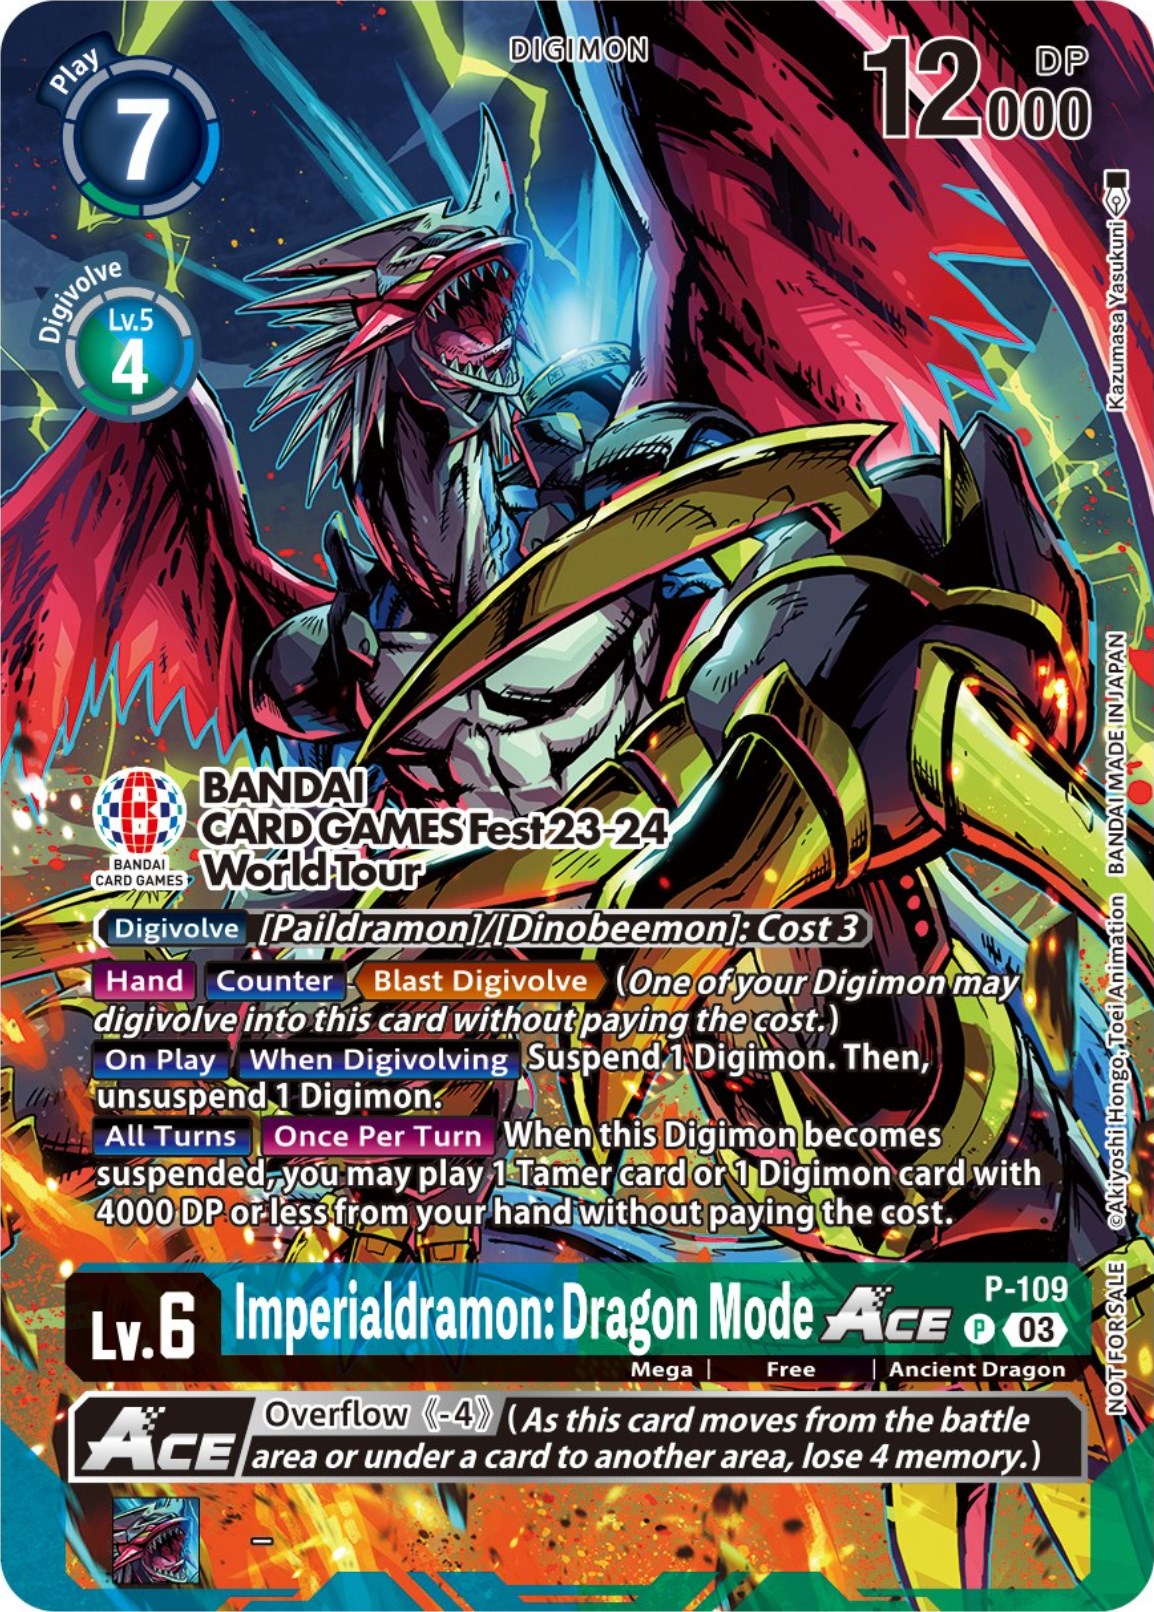 Imperialdramon: Dragon Mode Ace [P-109] (BANDAI Card Games Fest 23-24 World Tour) [Promotional Cards] | Total Play